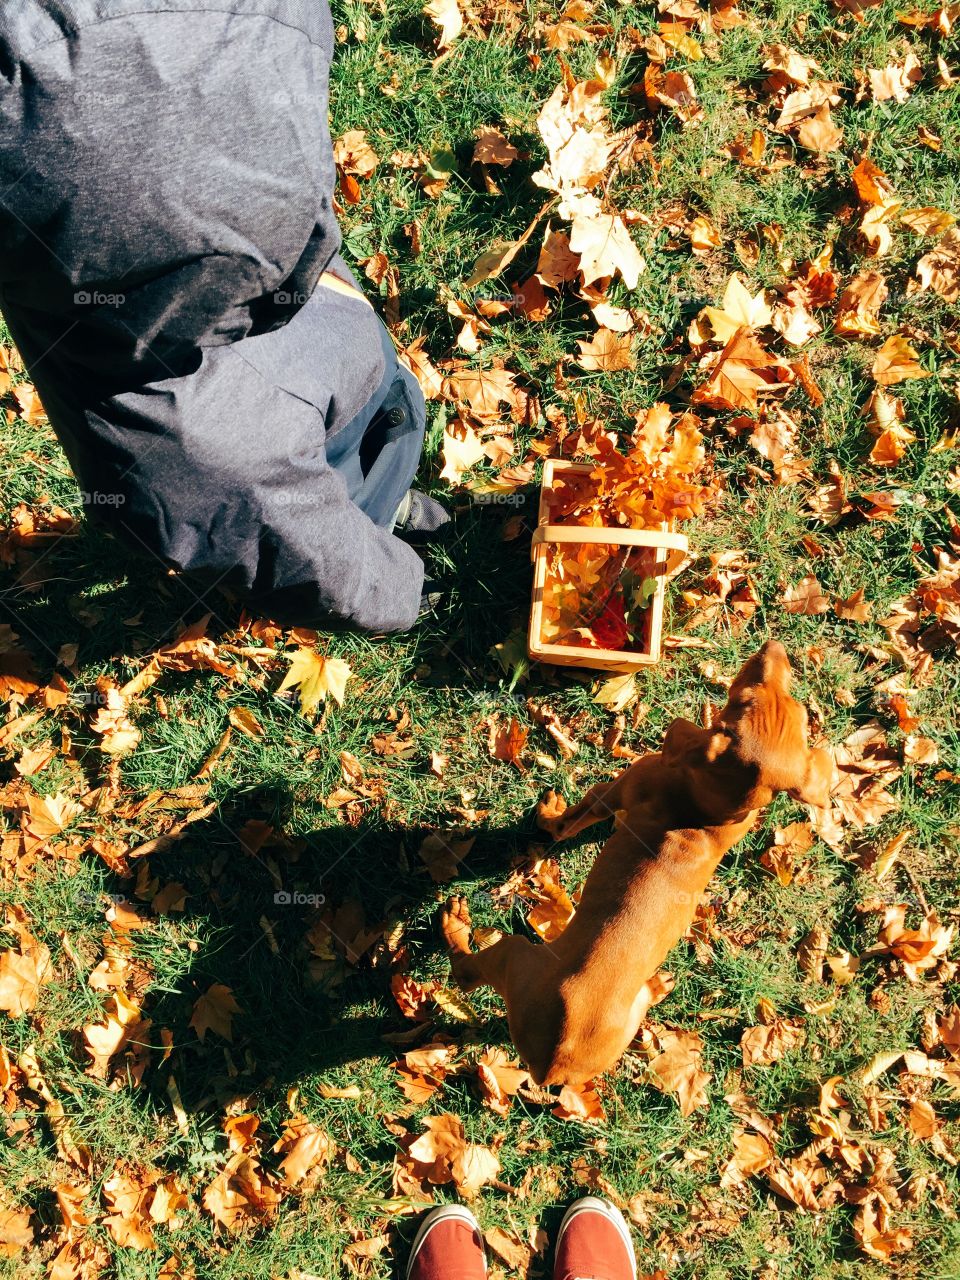 Boy and dog in autumn park. Going for a walk with son and puppy dog in fall leaves